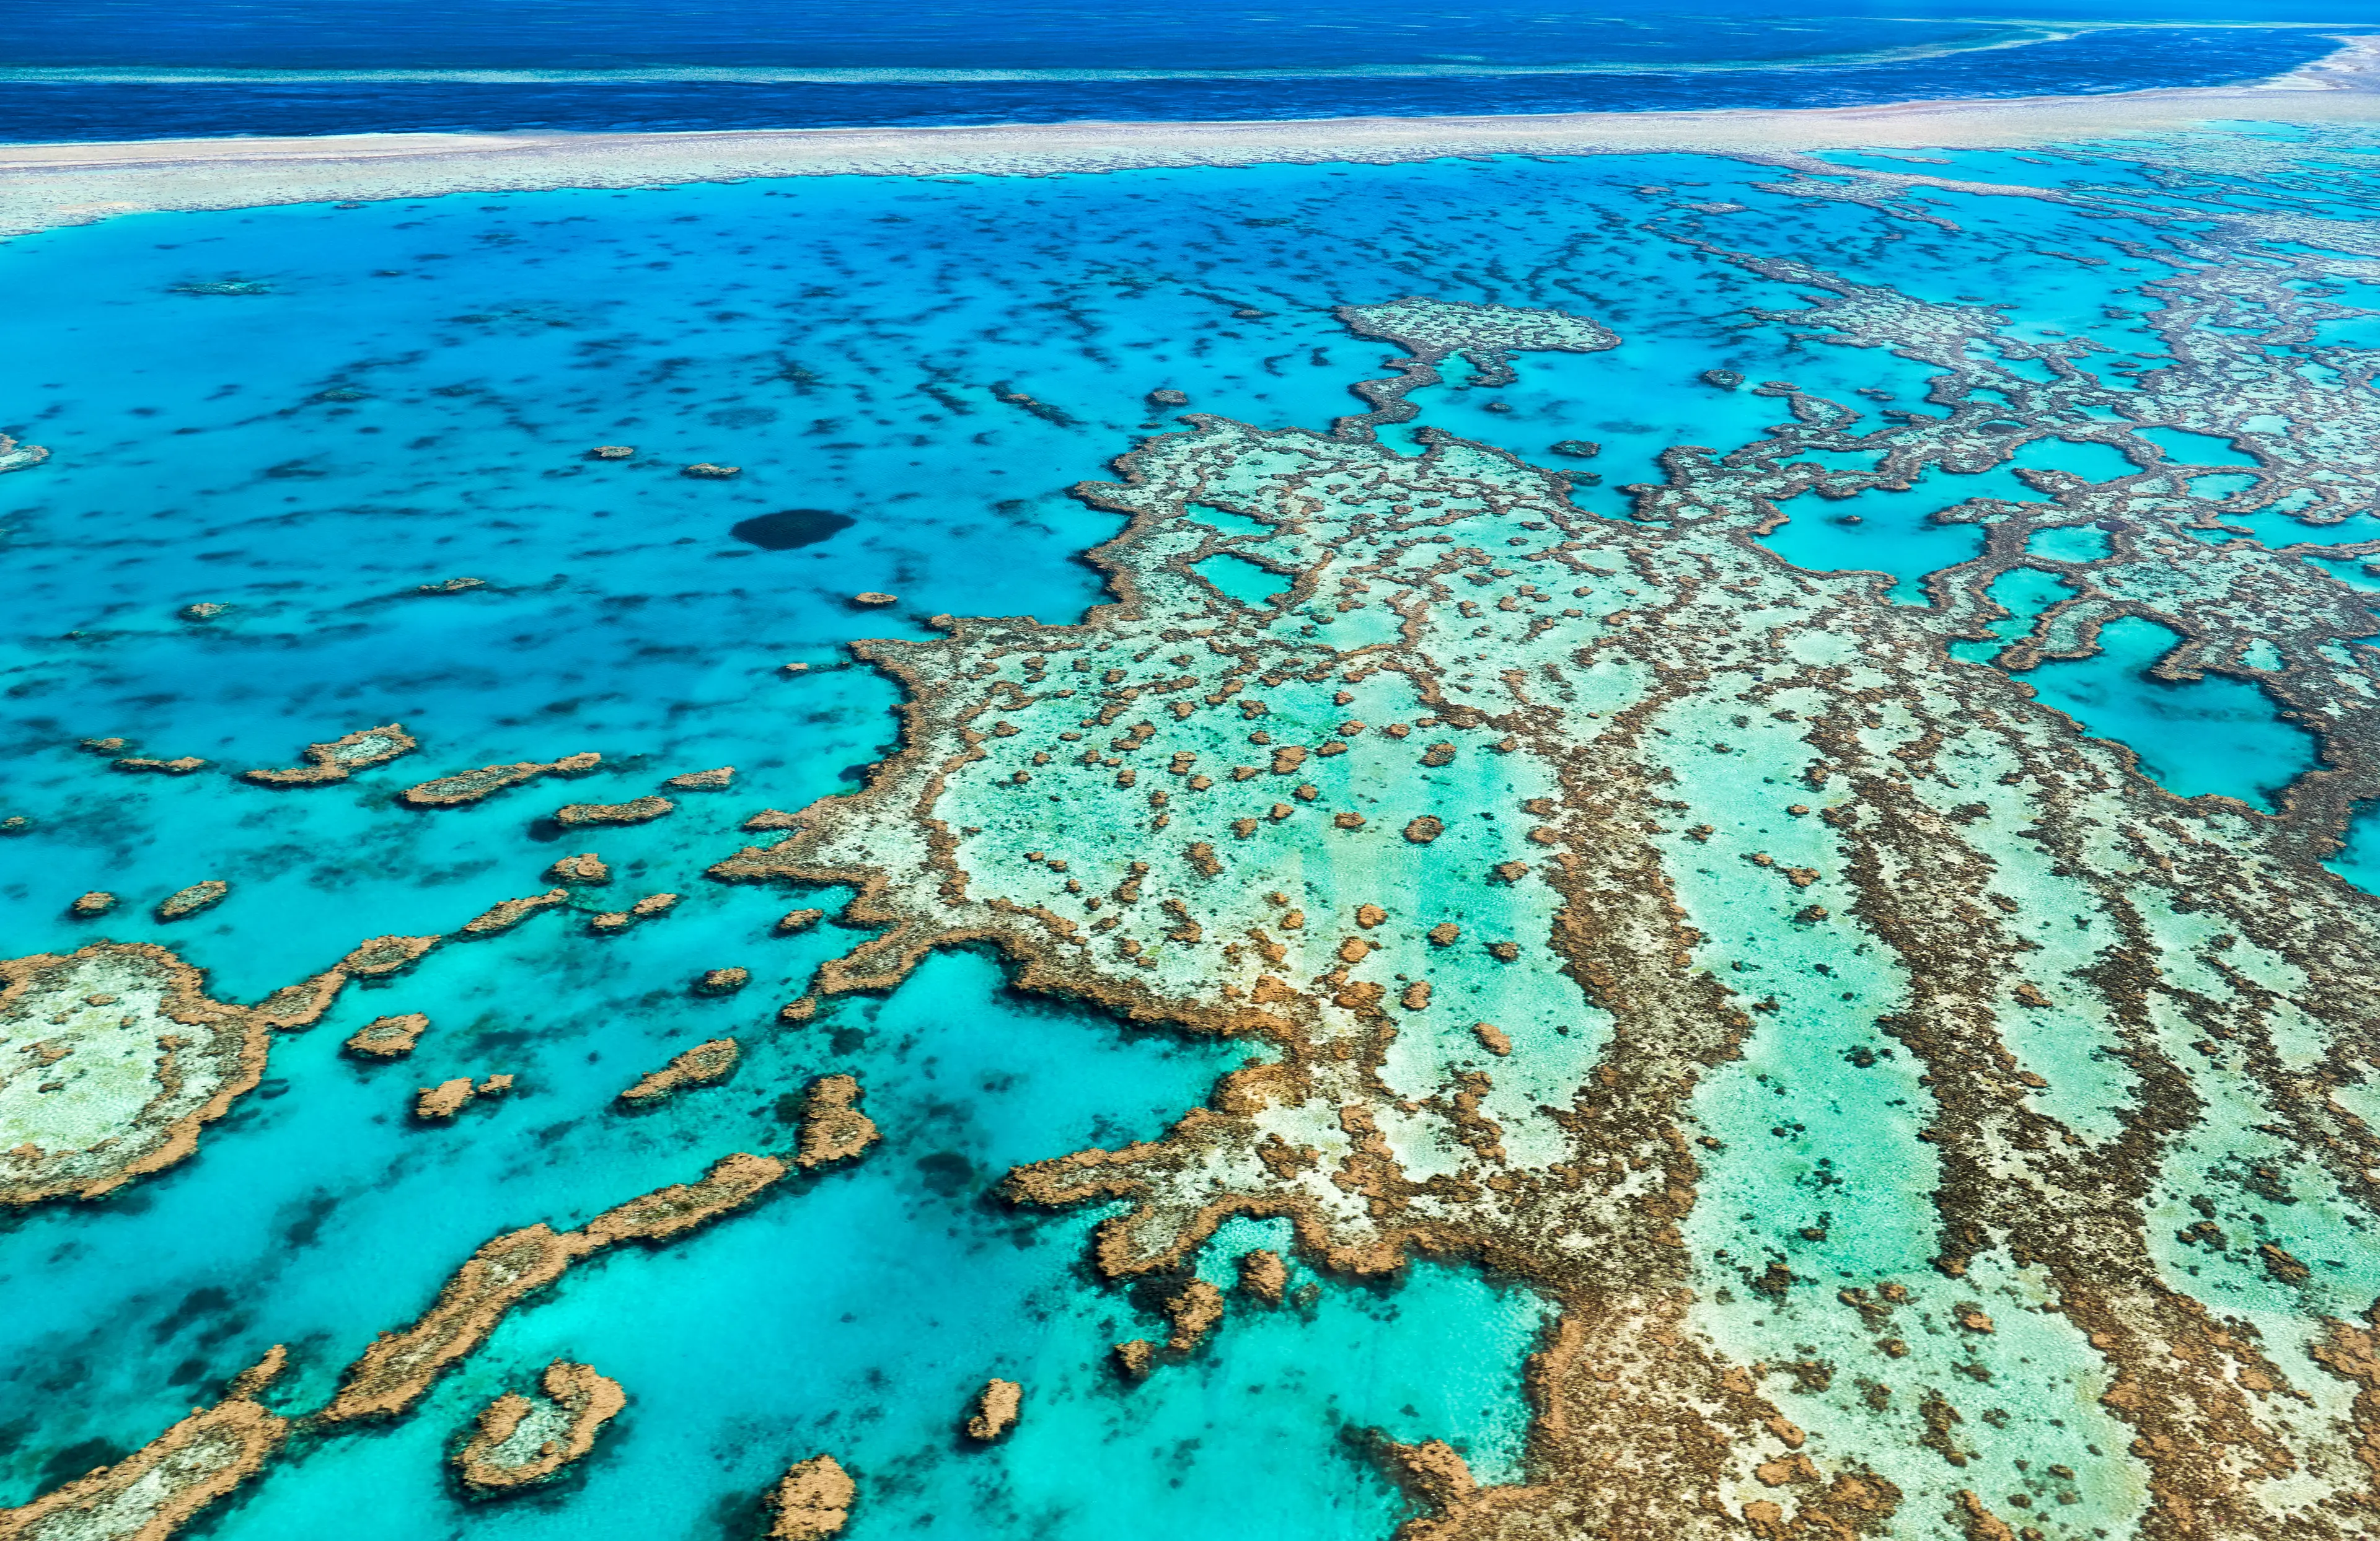 1-Day Local Family Adventure & Relaxation at Great Barrier Reef